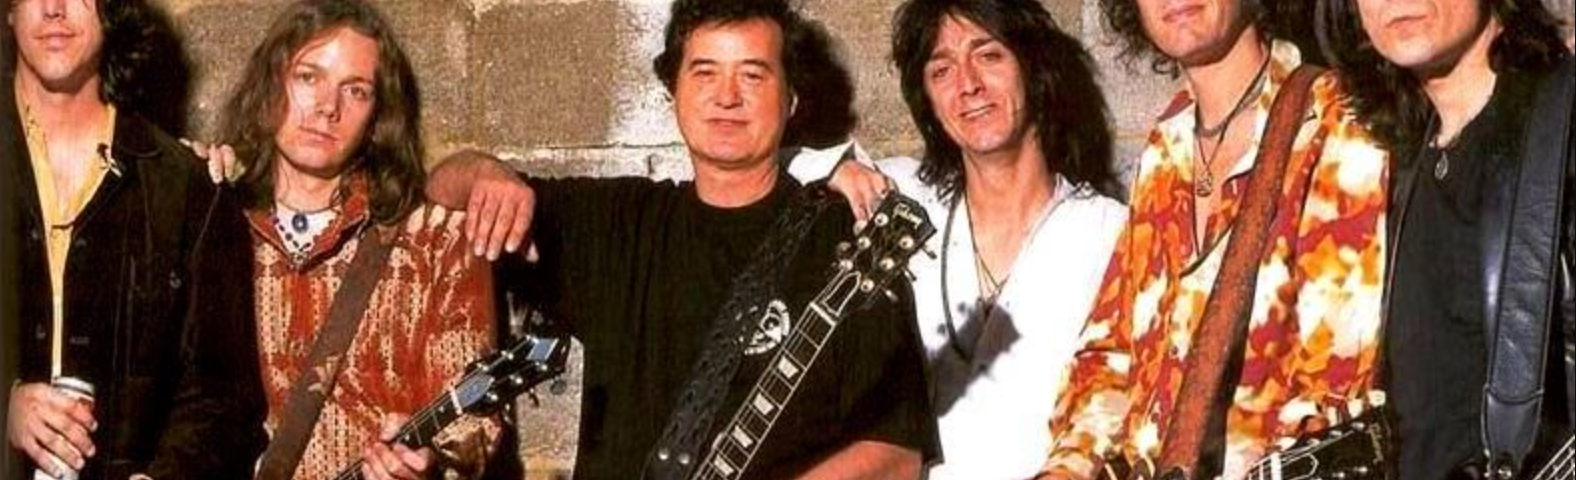 Jimmy Page and The Black Crowes